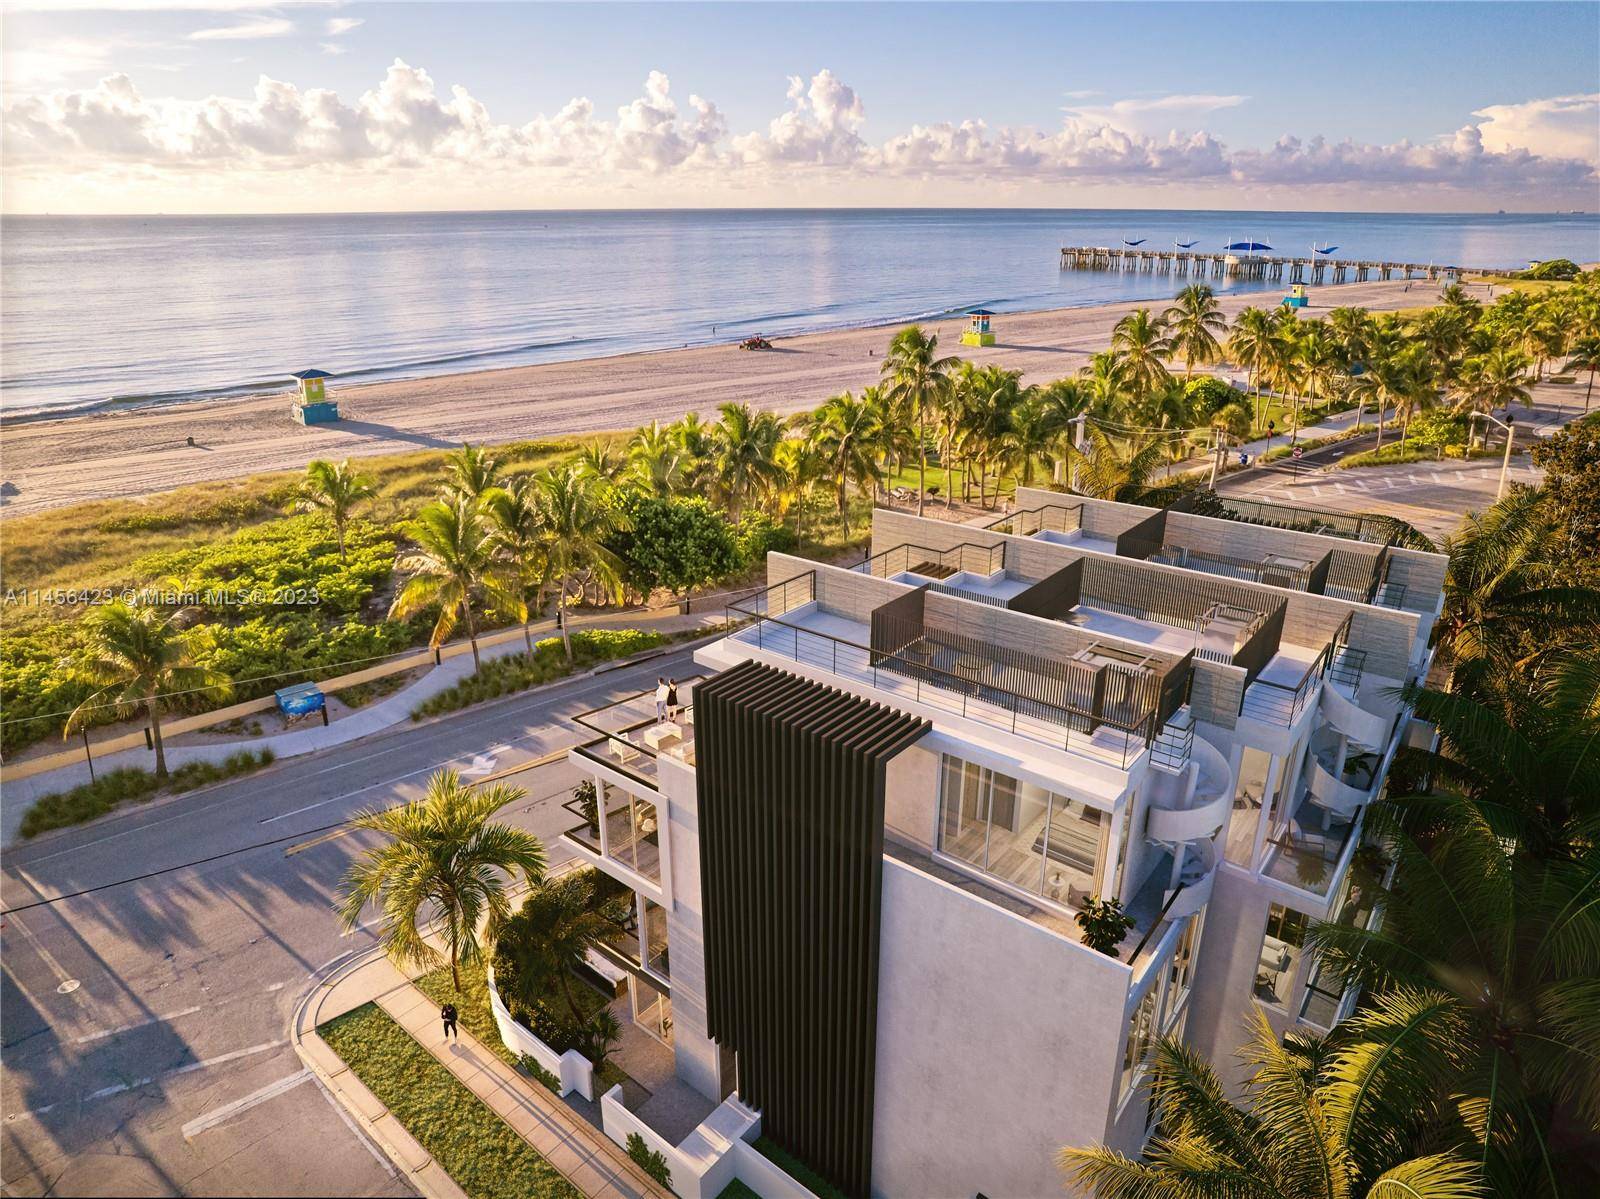 Ultra Luxurious NEW 4 Story Townhouse with Direct Unobstructed Ocean views and direct beach access steps away from Pompano Beach.